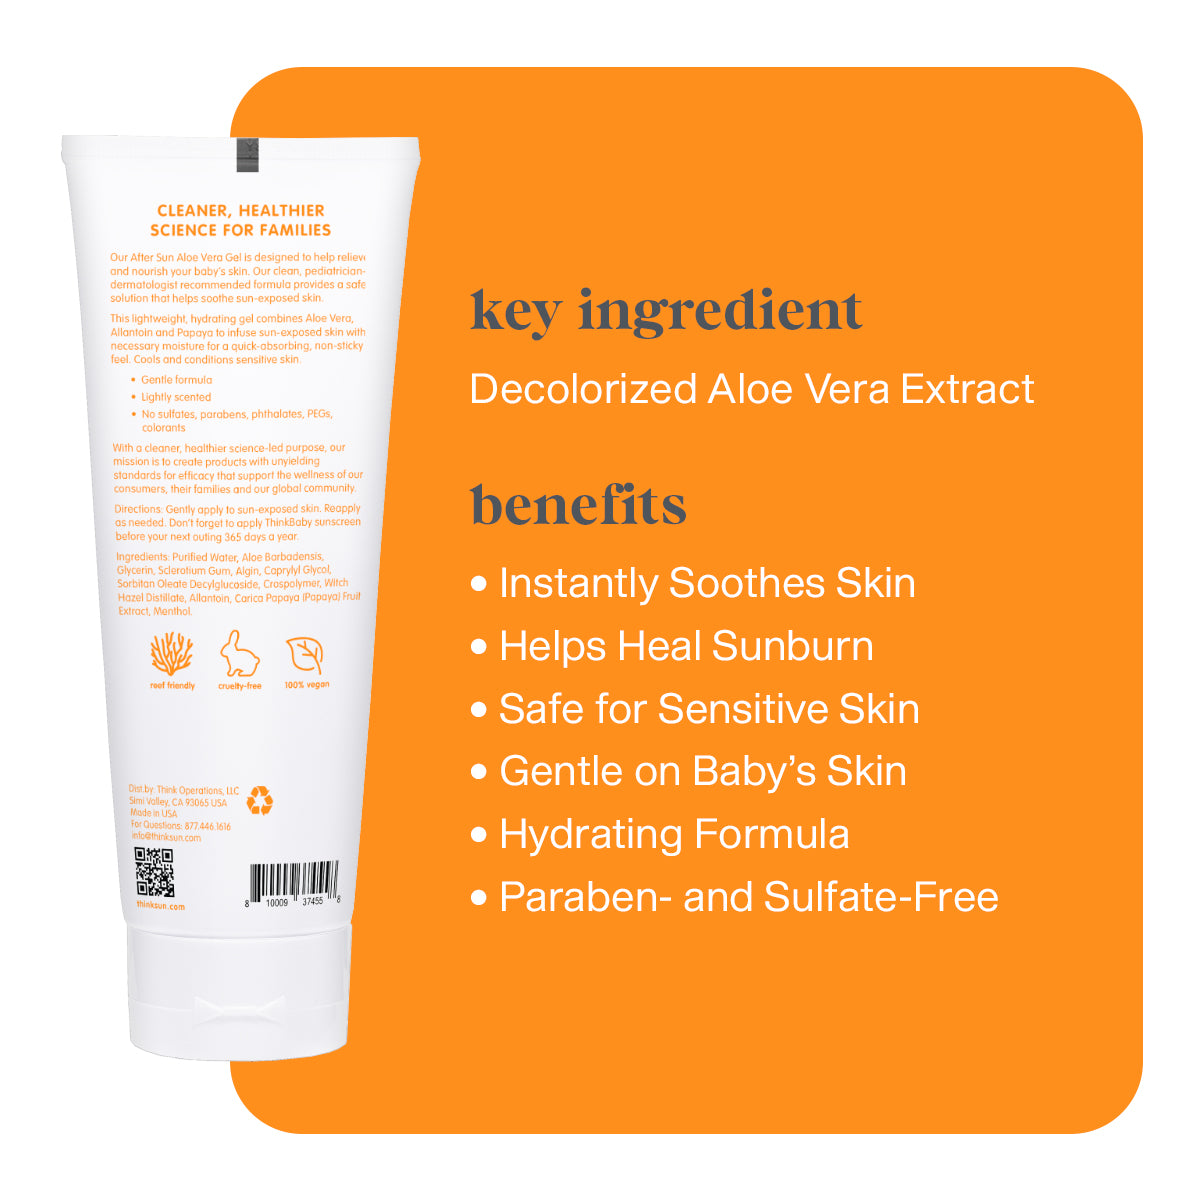 Decolorized Alo Vera Extract helps sooth and heal sunburn. Gentle formula for Baby's sensitive skin. Paraben and Sulfate-Free